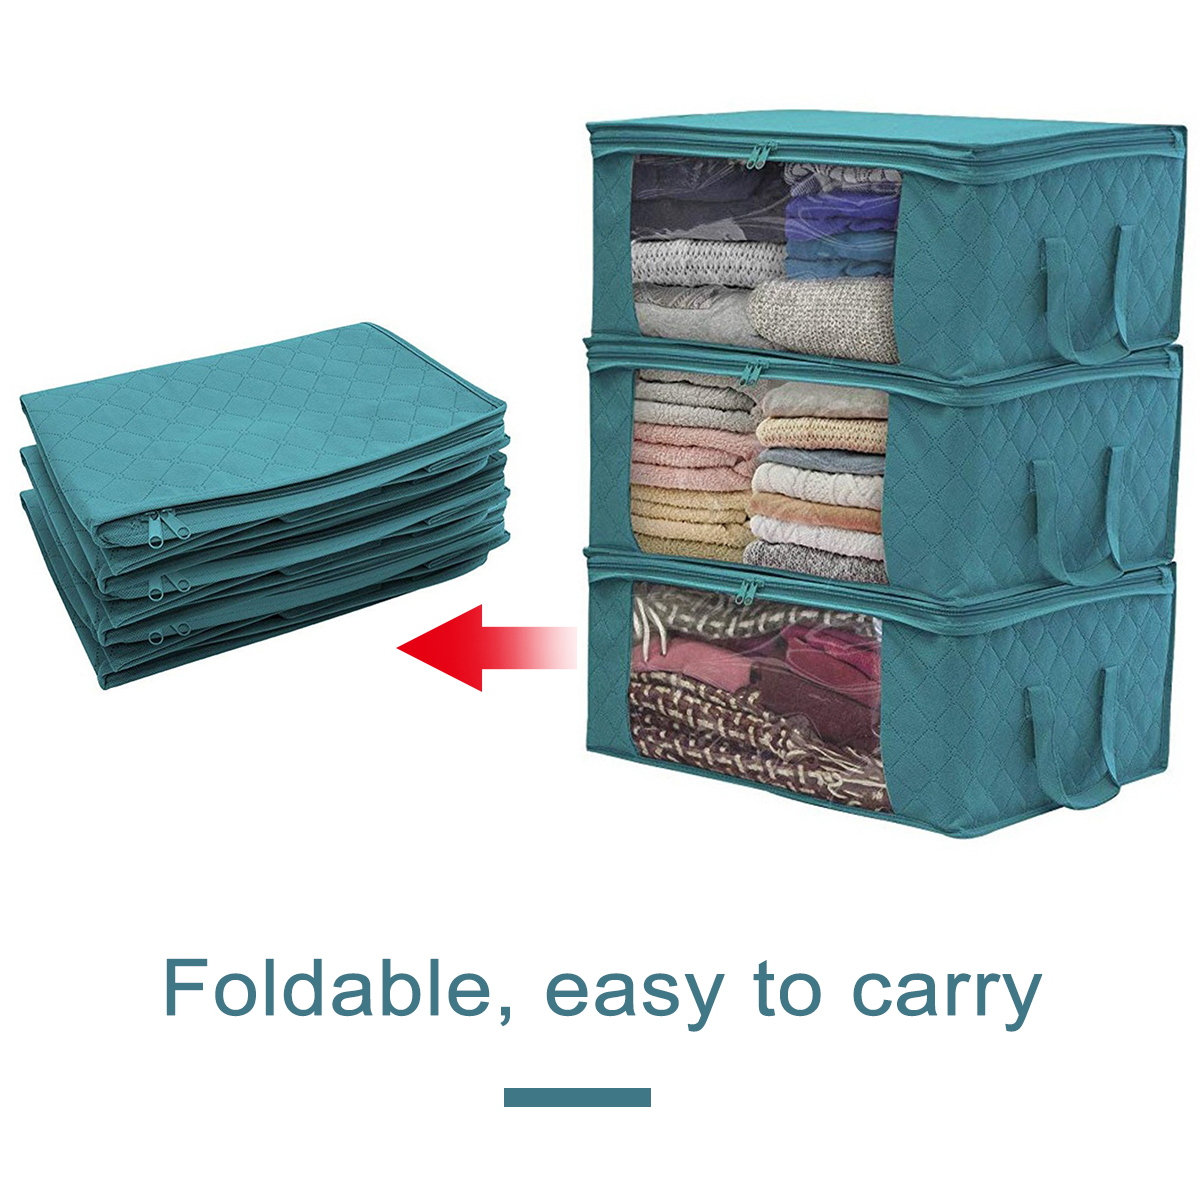 3PCS-Foldable-Clothes-Storage-Boxes-Bags-Ziped-Organizers-Closet-Wardrobe-1705829-3